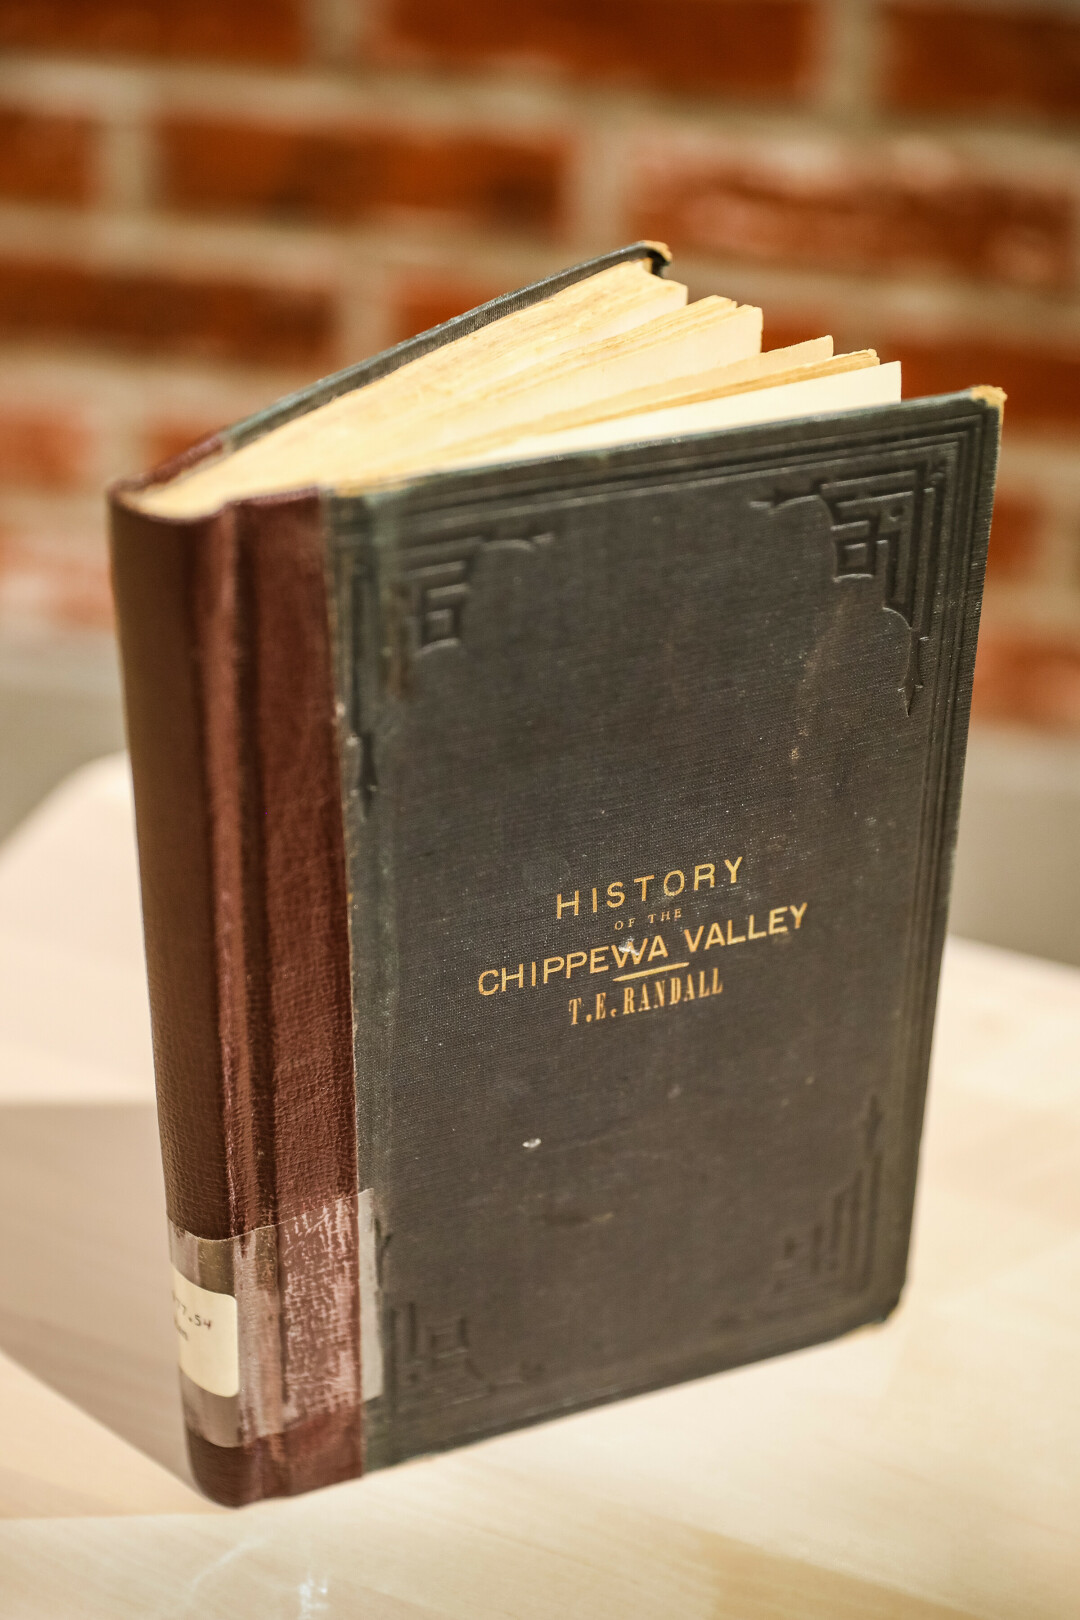 If you're wondering what is perhaps the oldest book in the area that was published in the area, then look no further than this book before your very eyes! 